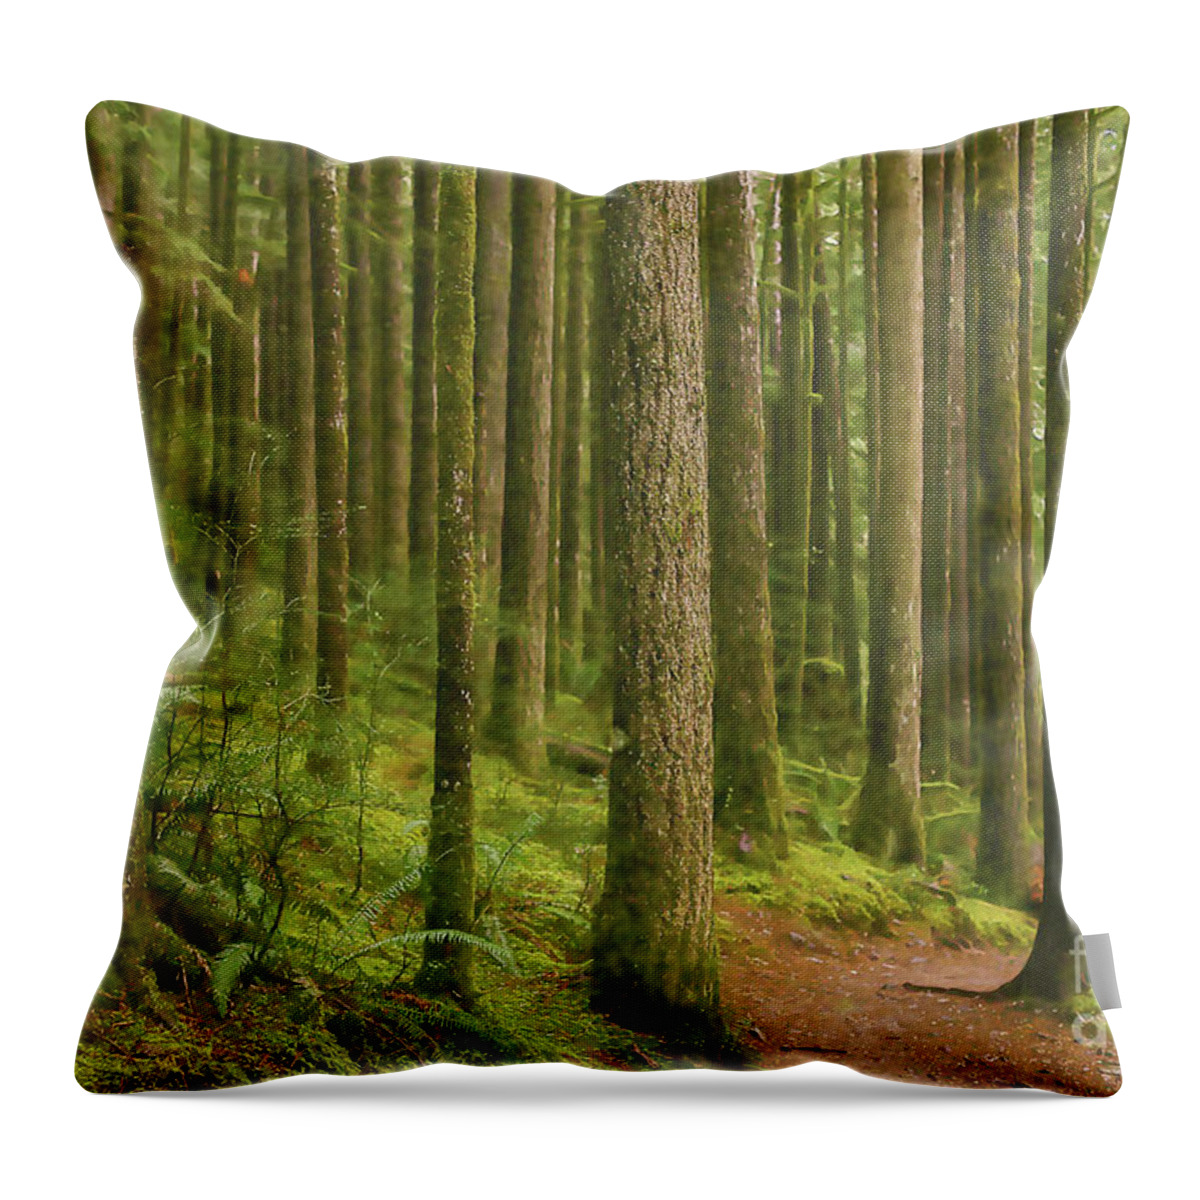 Rain Forest Throw Pillow featuring the digital art Pines Ferns And Moss by Phil Perkins